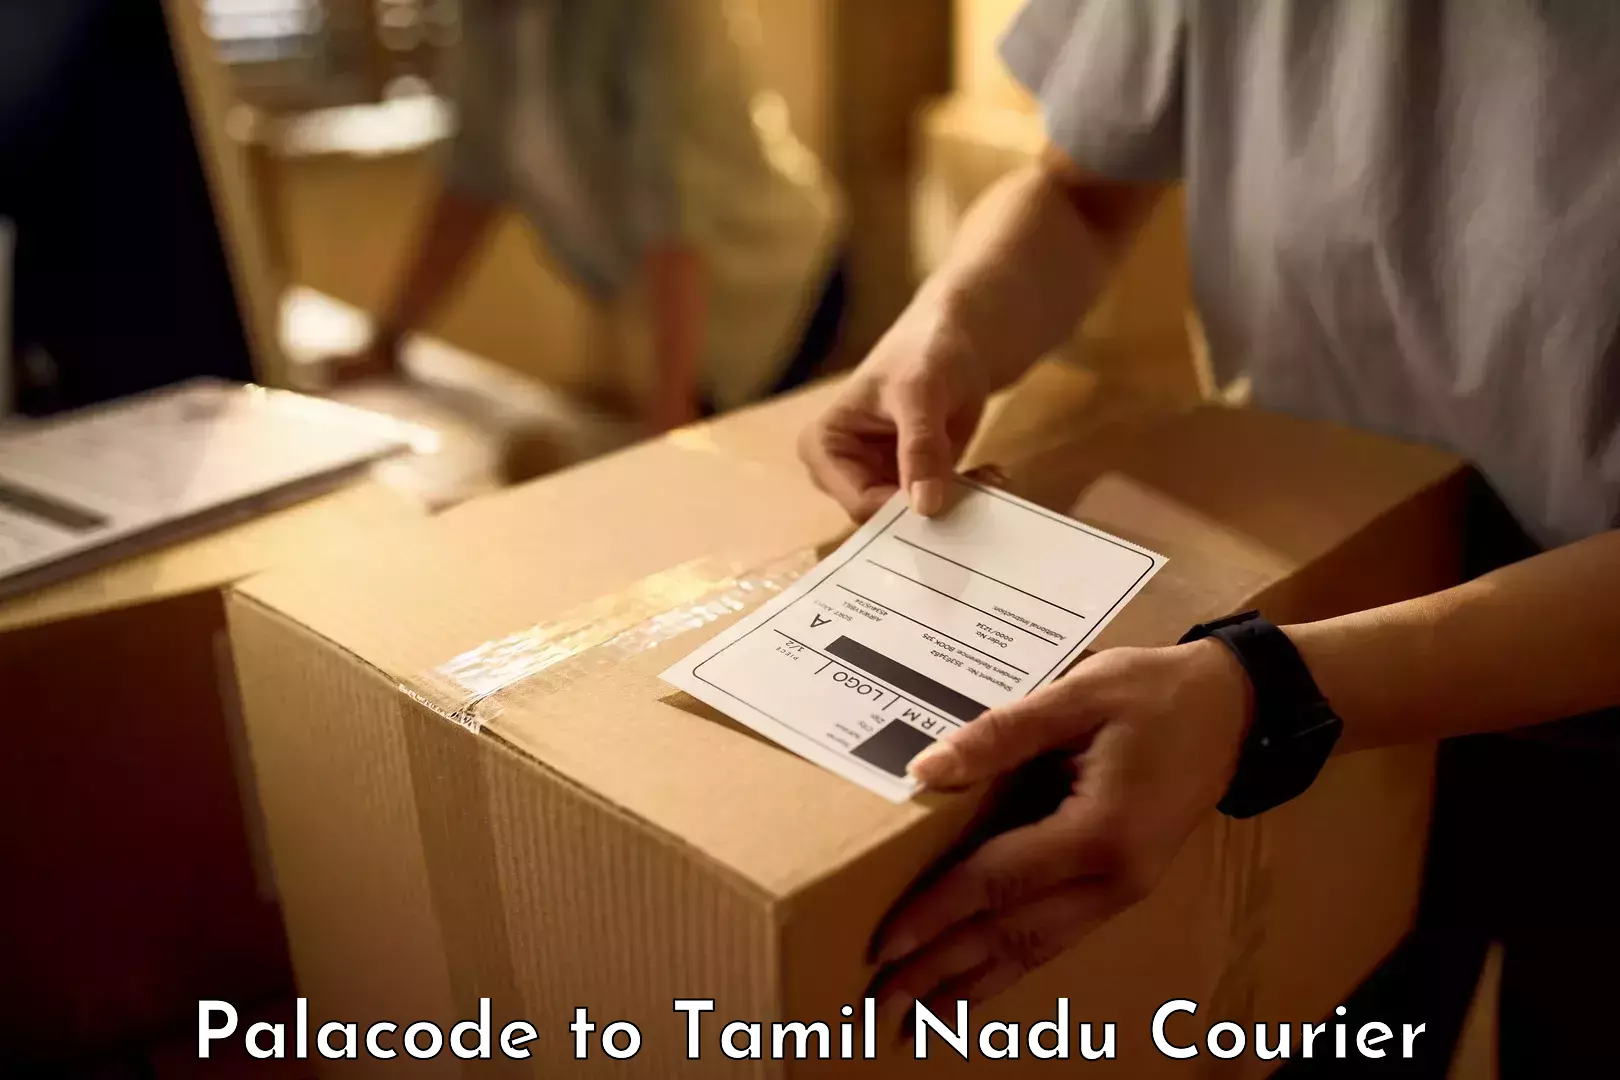 Baggage relocation service Palacode to Tamil Nadu